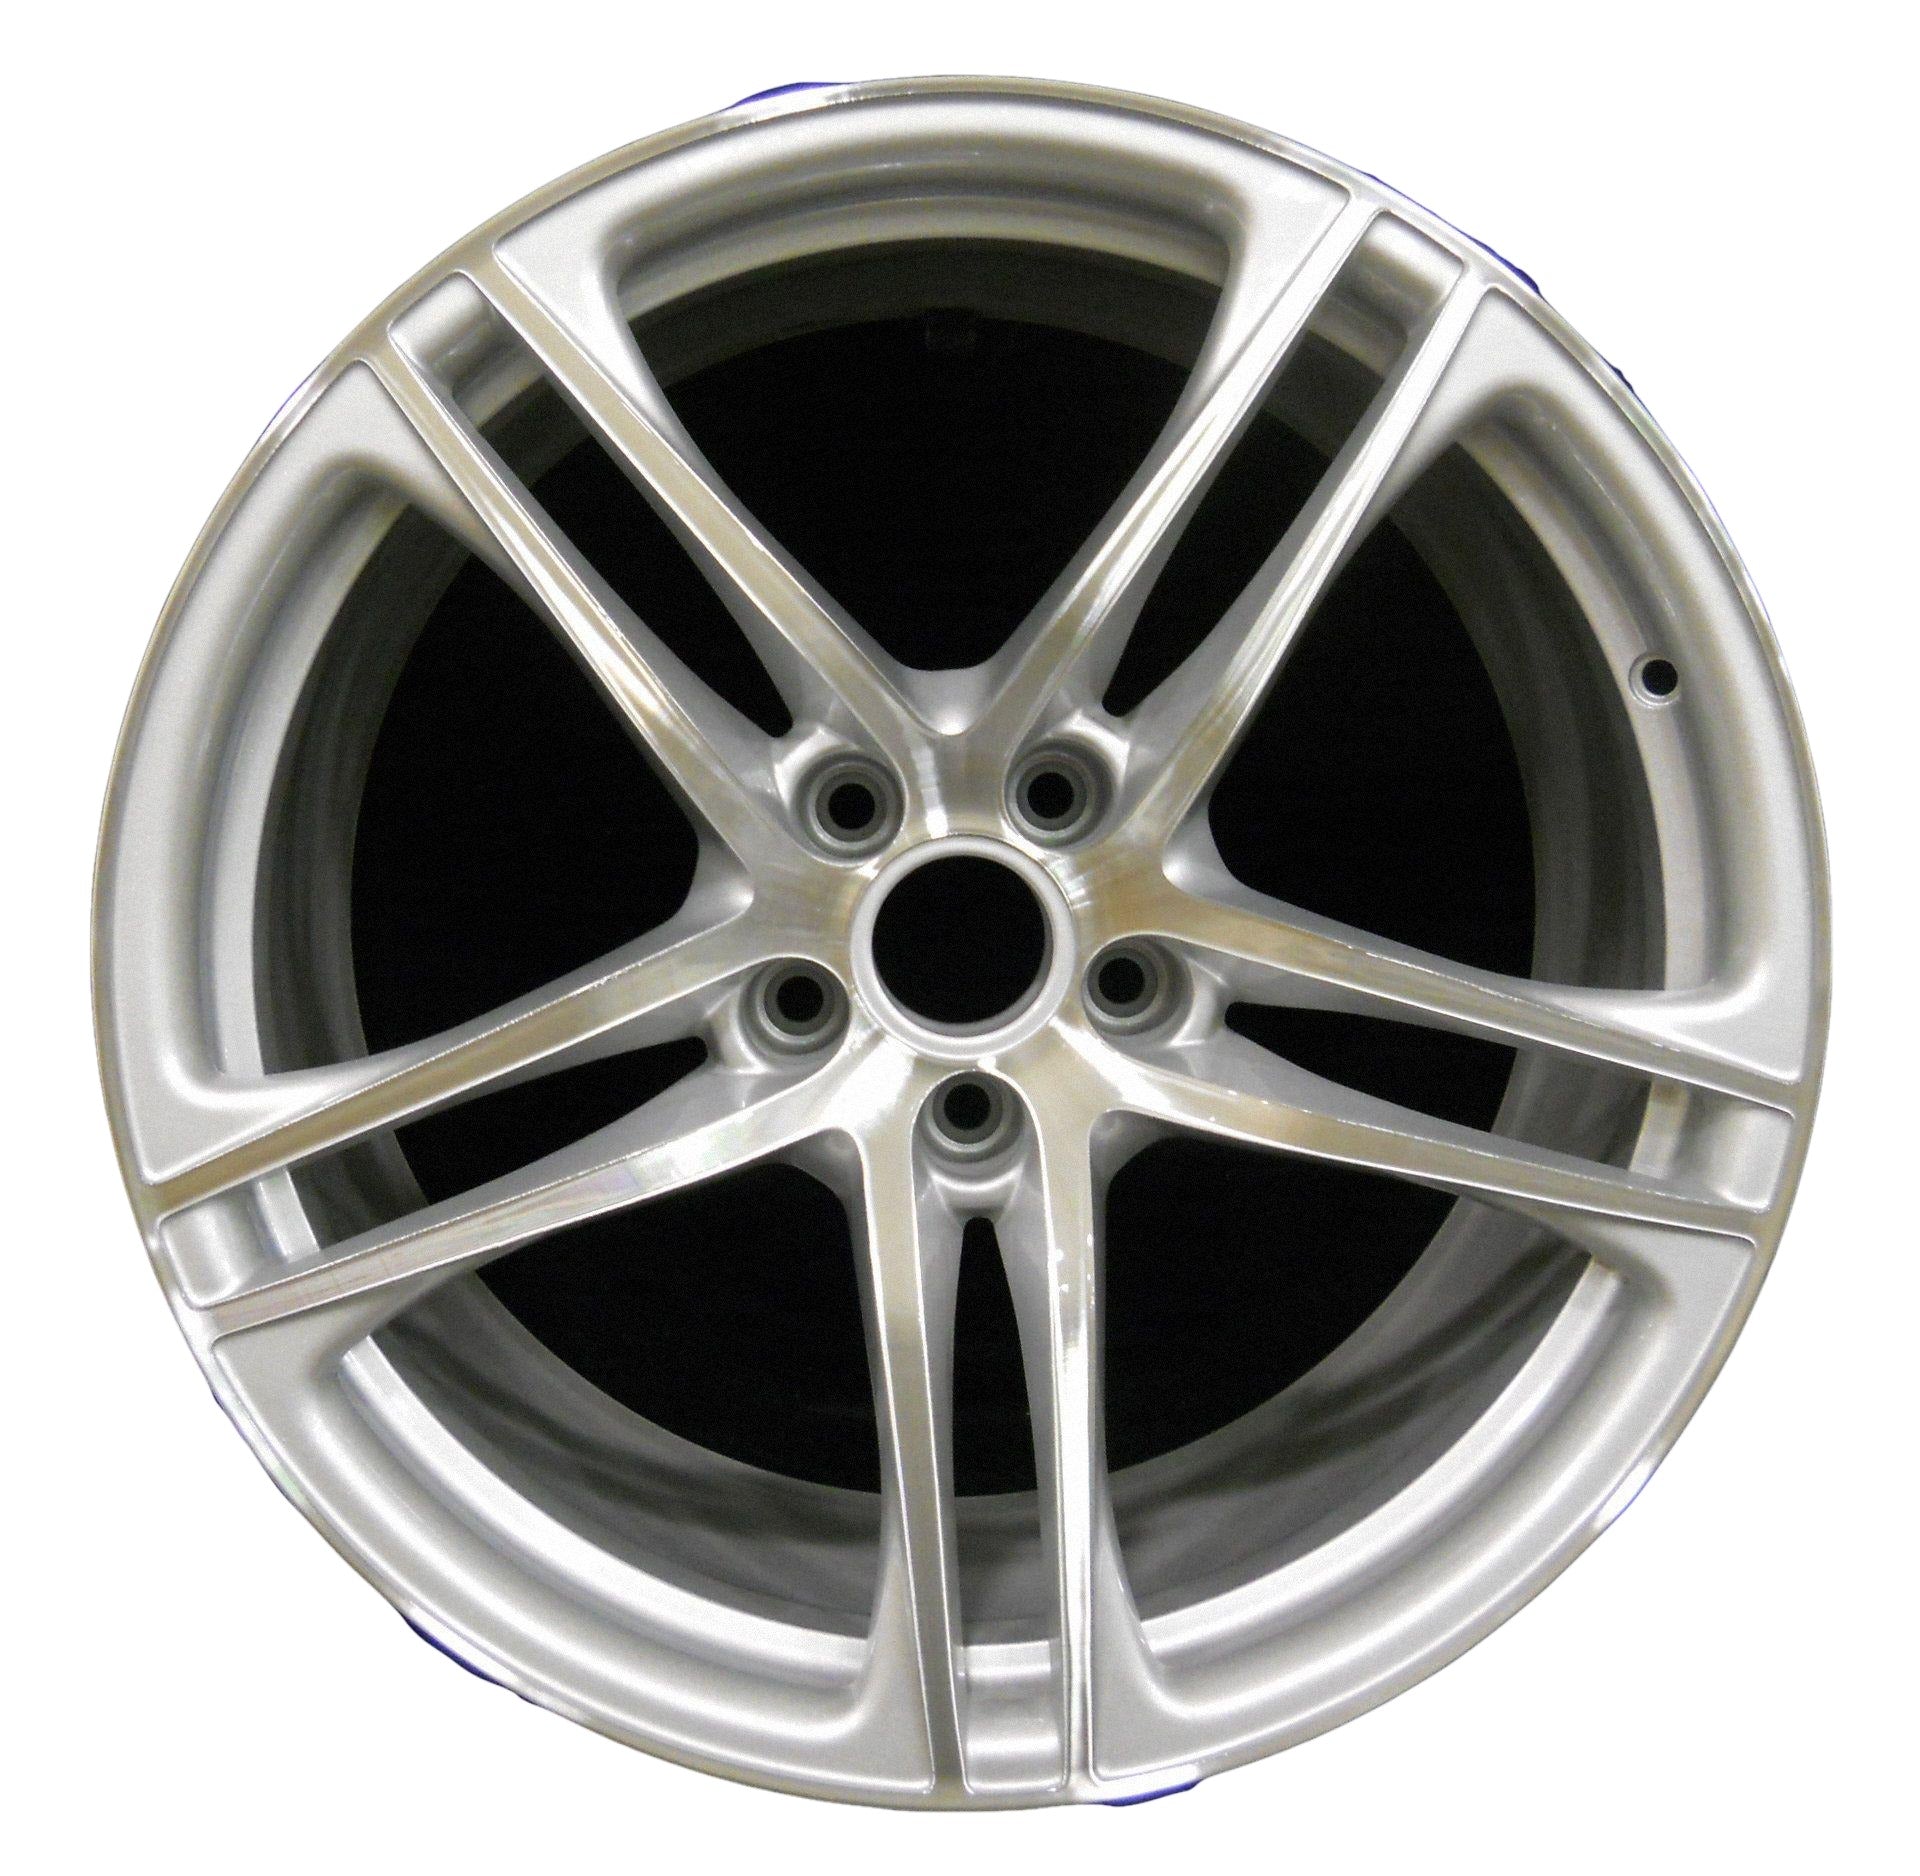 Audi R8  2008, 2009, 2010, 2011, 2012, 2013, 2014 Factory OEM Car Wheel Size 19x11 Alloy WAO.58830RE.PS13.MABRT